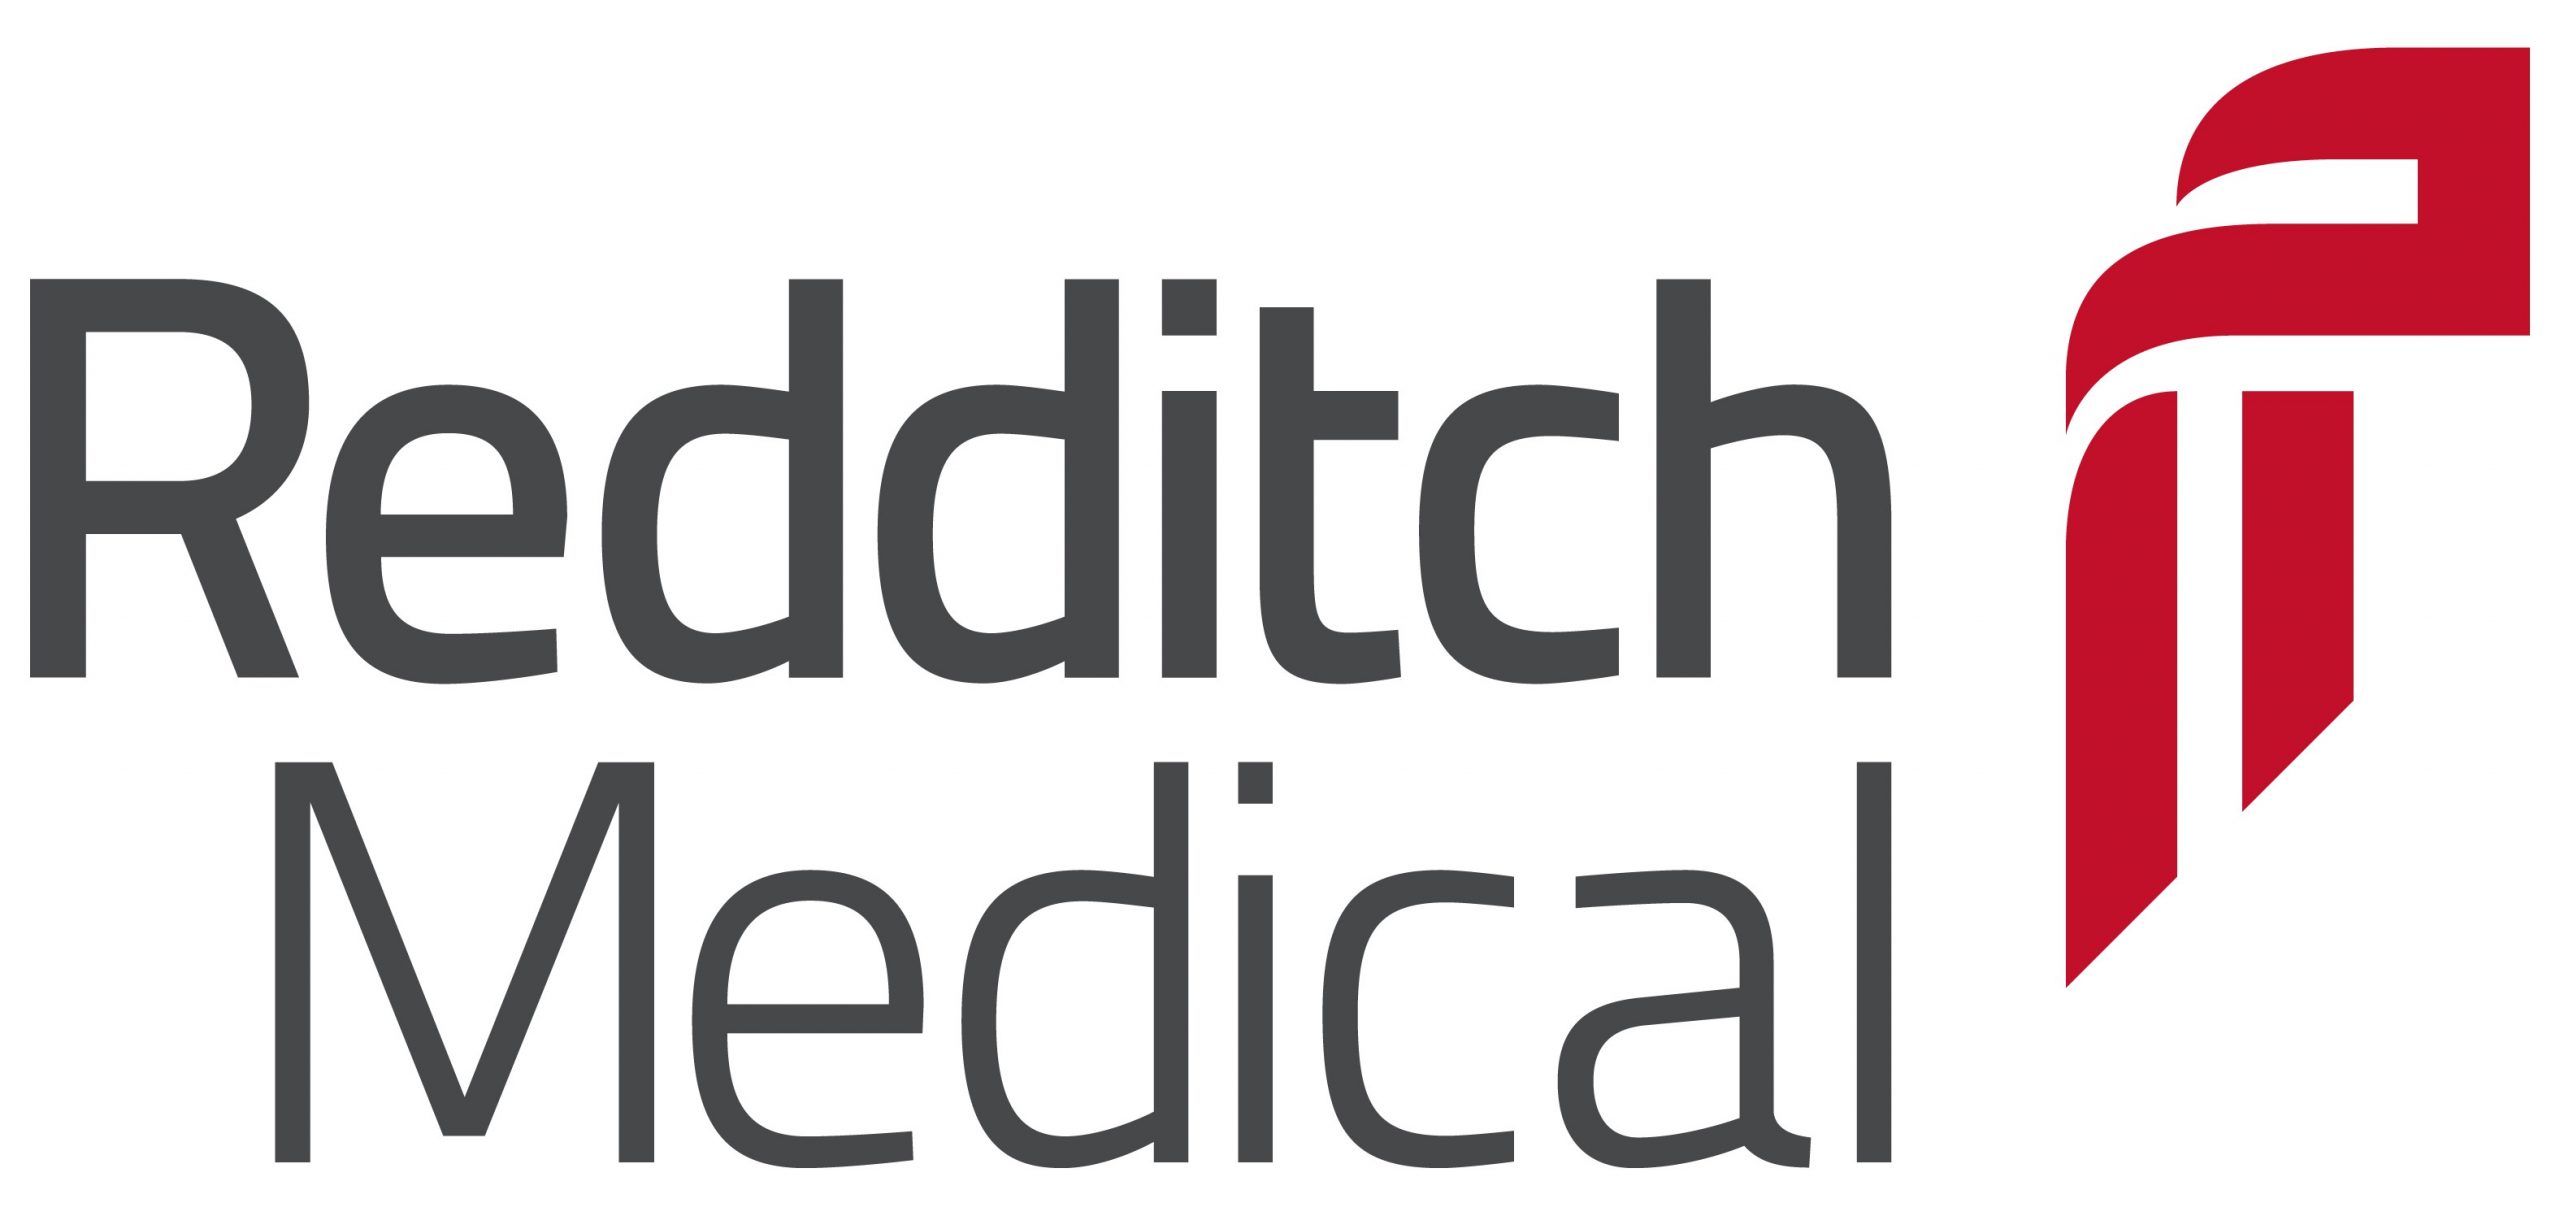 The logo of our partner, Redditch